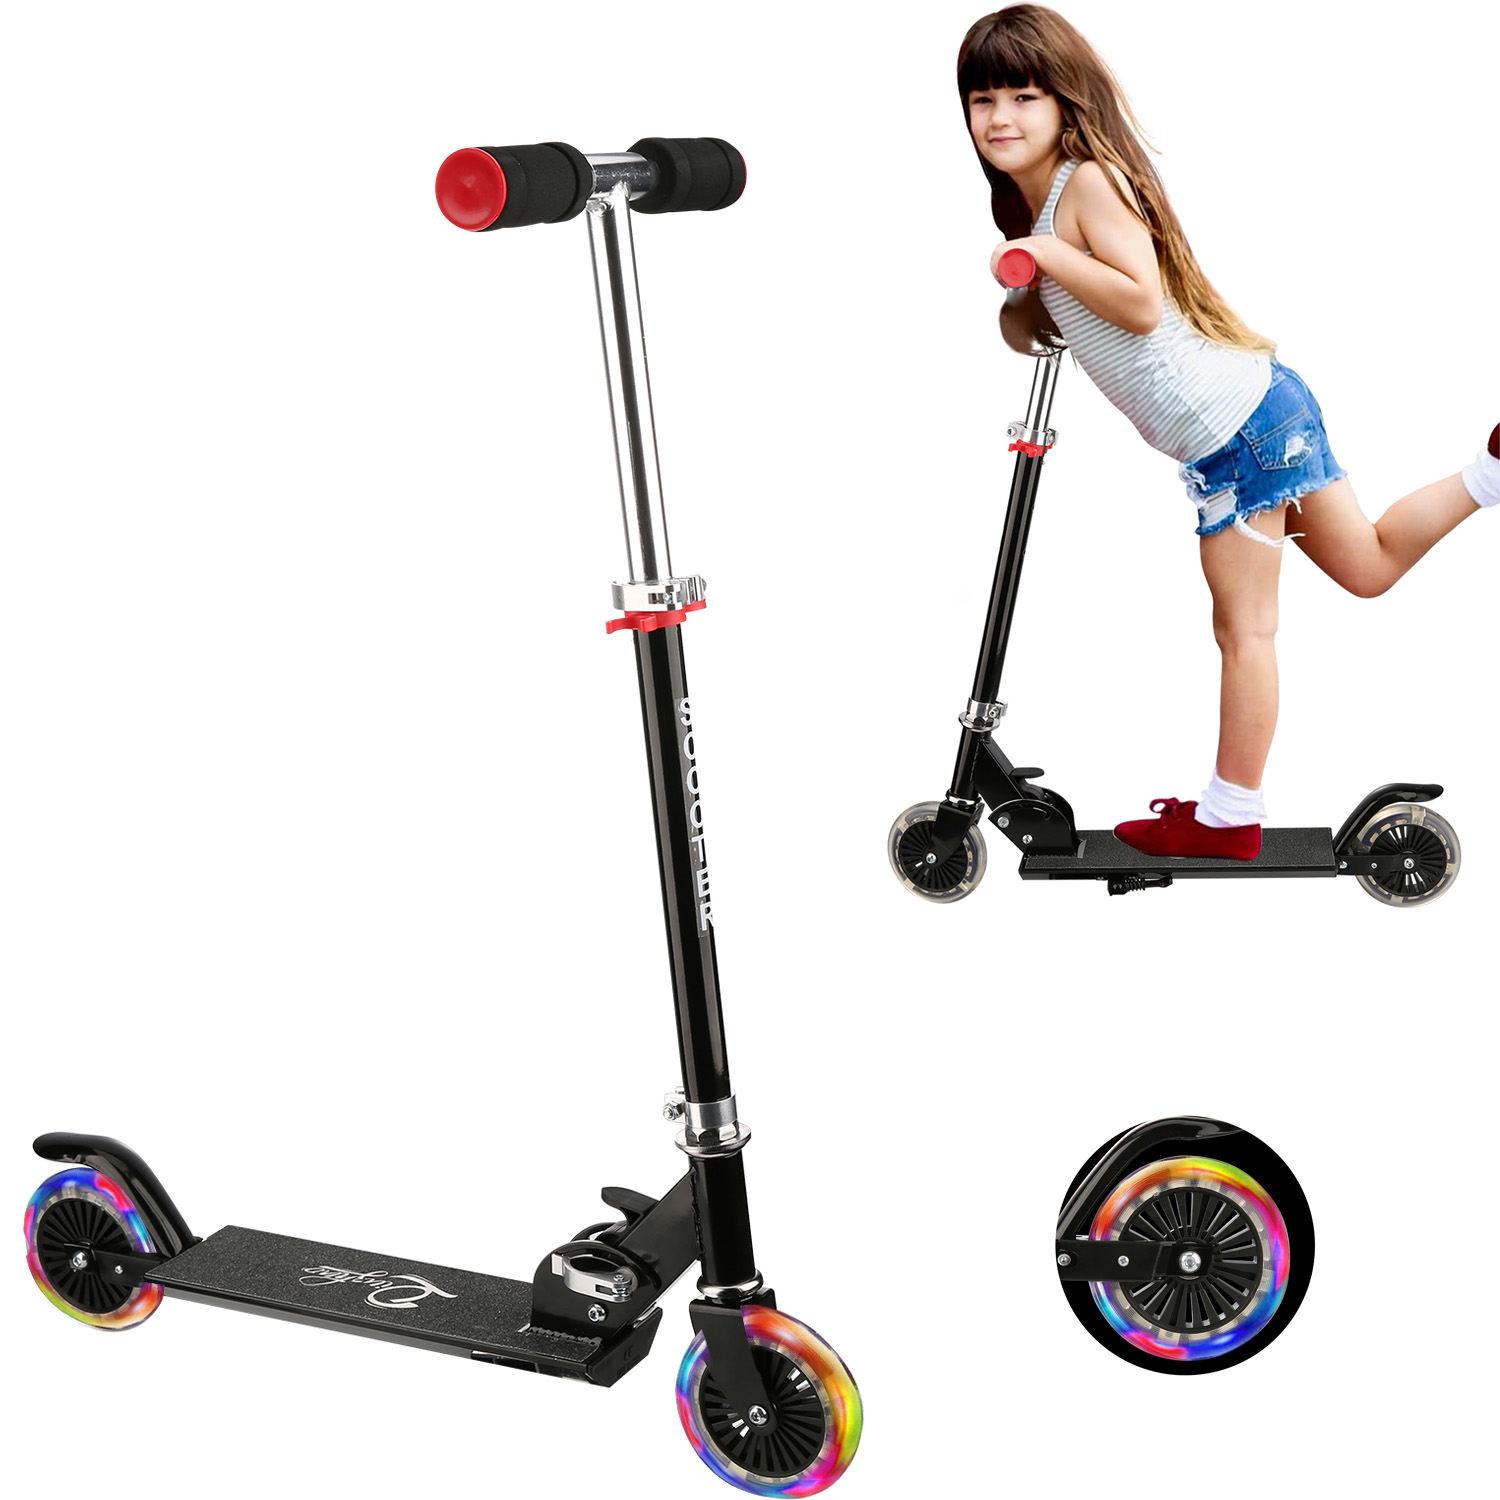 Details about  / Kick Scooter for Ages 3-12 Boy /& Girls 3 LED Flashing Light Wheels